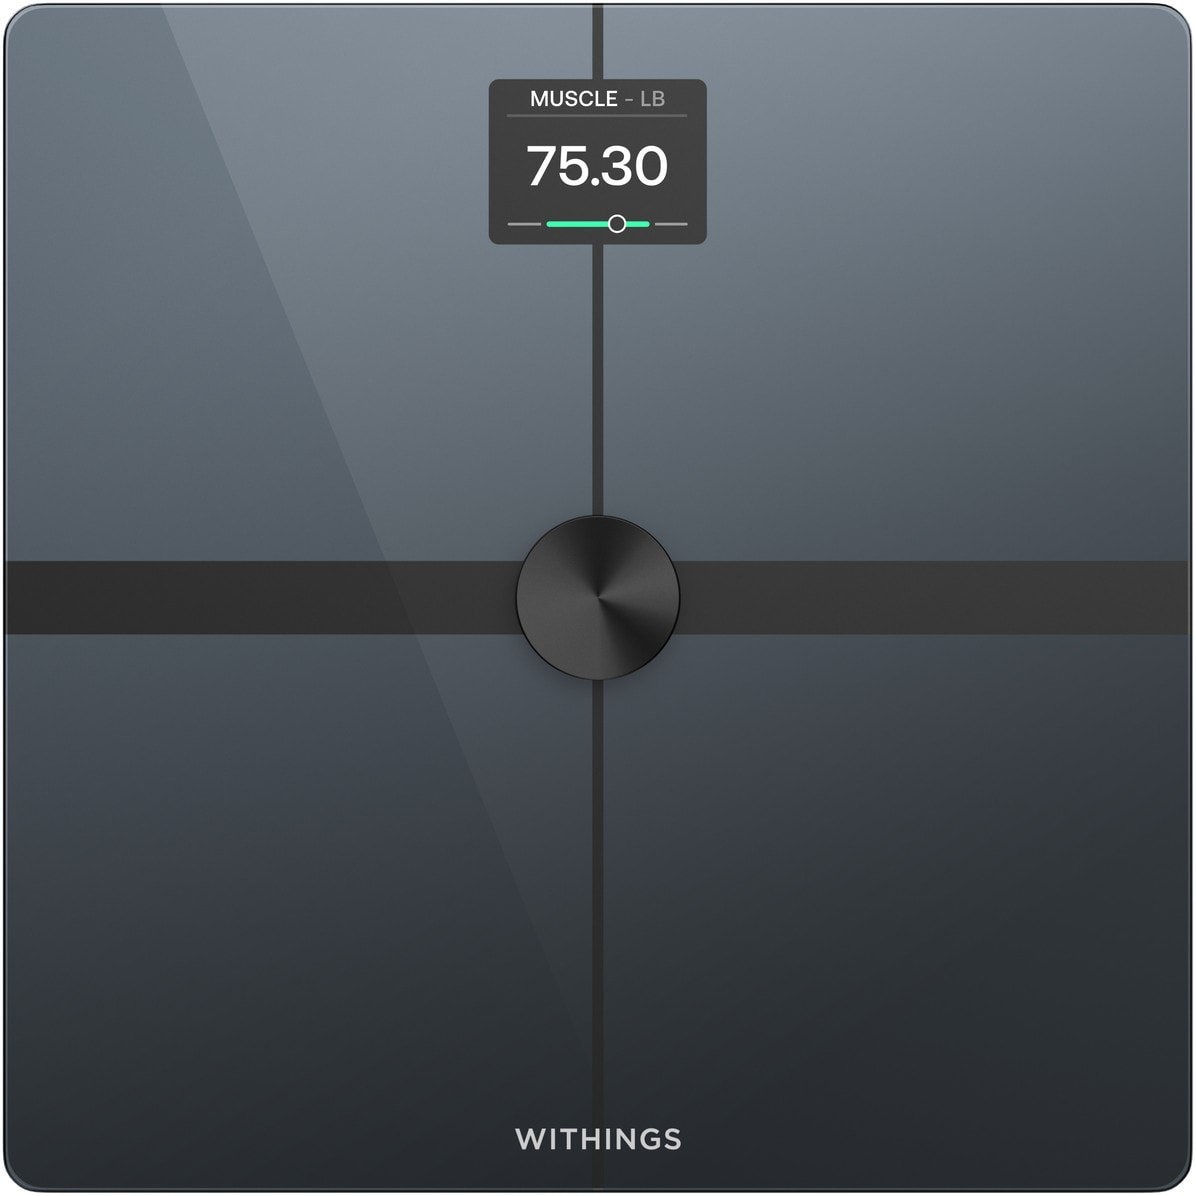 The new Withings Body Smart scale not only measures health metrics, it keeps them private if you like.